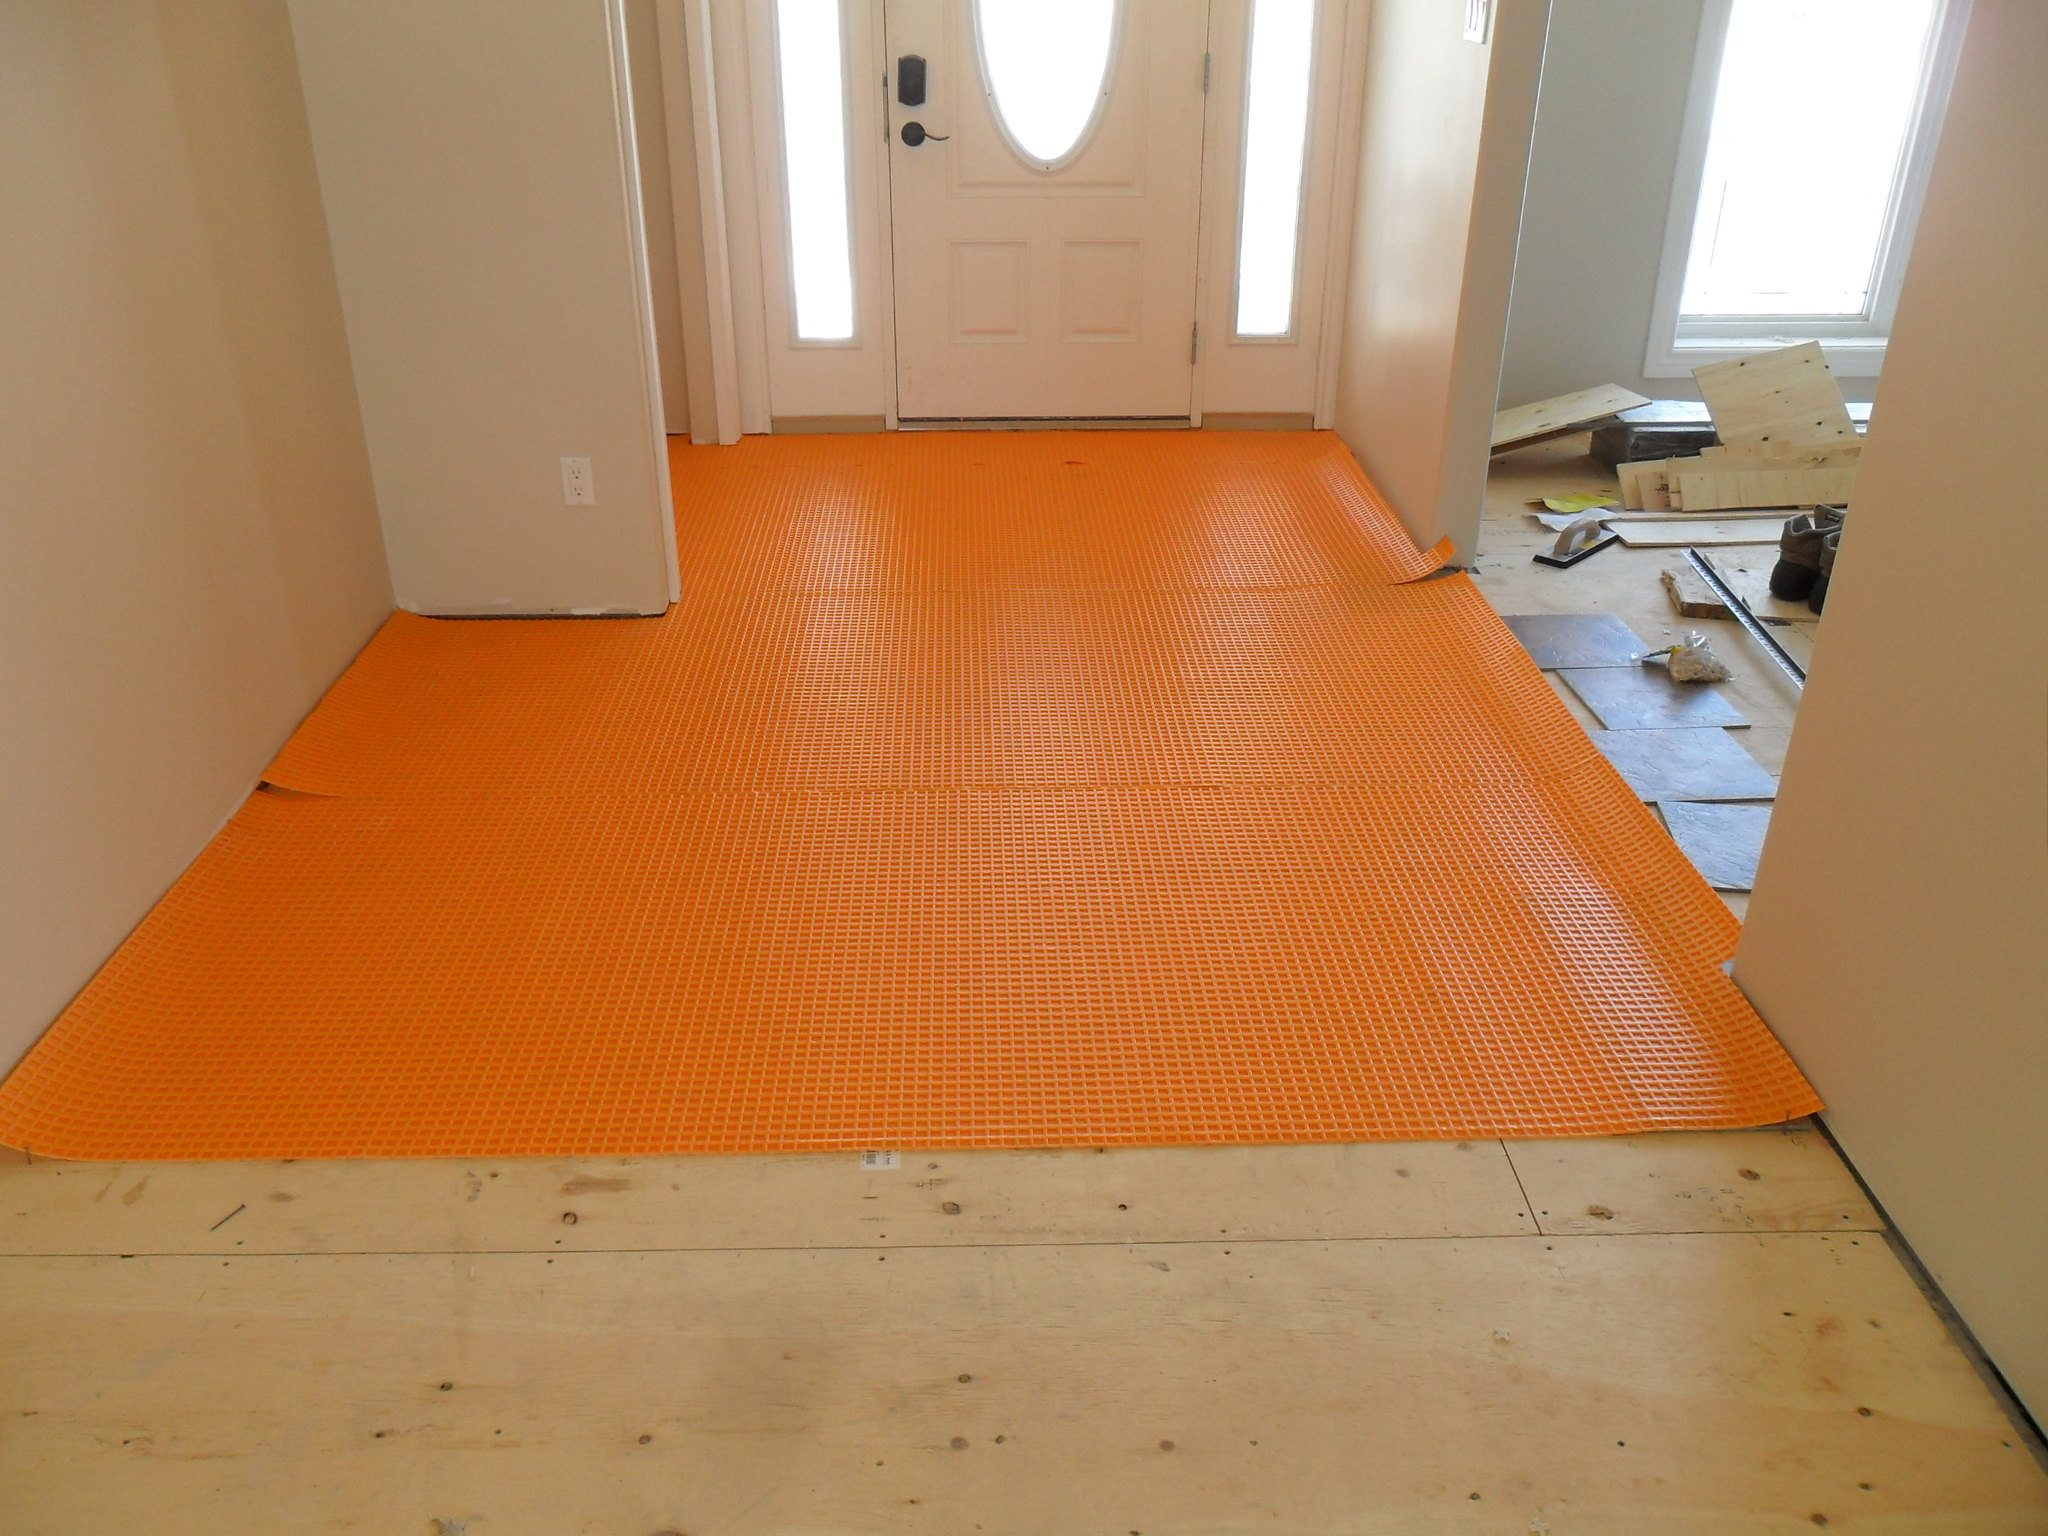 Ditra Over Plywood Theplywood Com, How To Prepare Floor For Tile